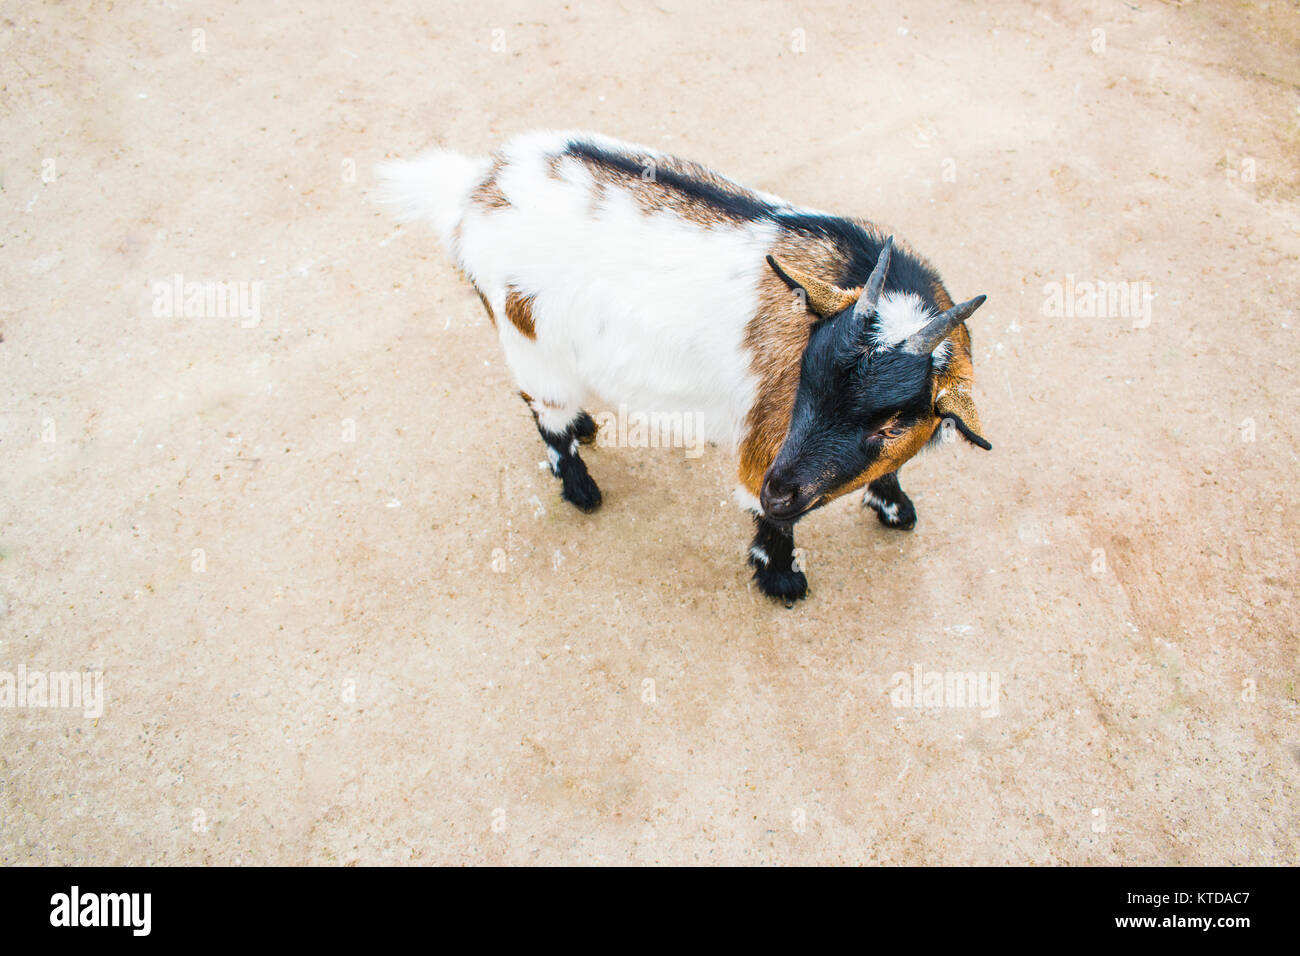 A small portrait of a goat. Little goat with small horns Stock Photo